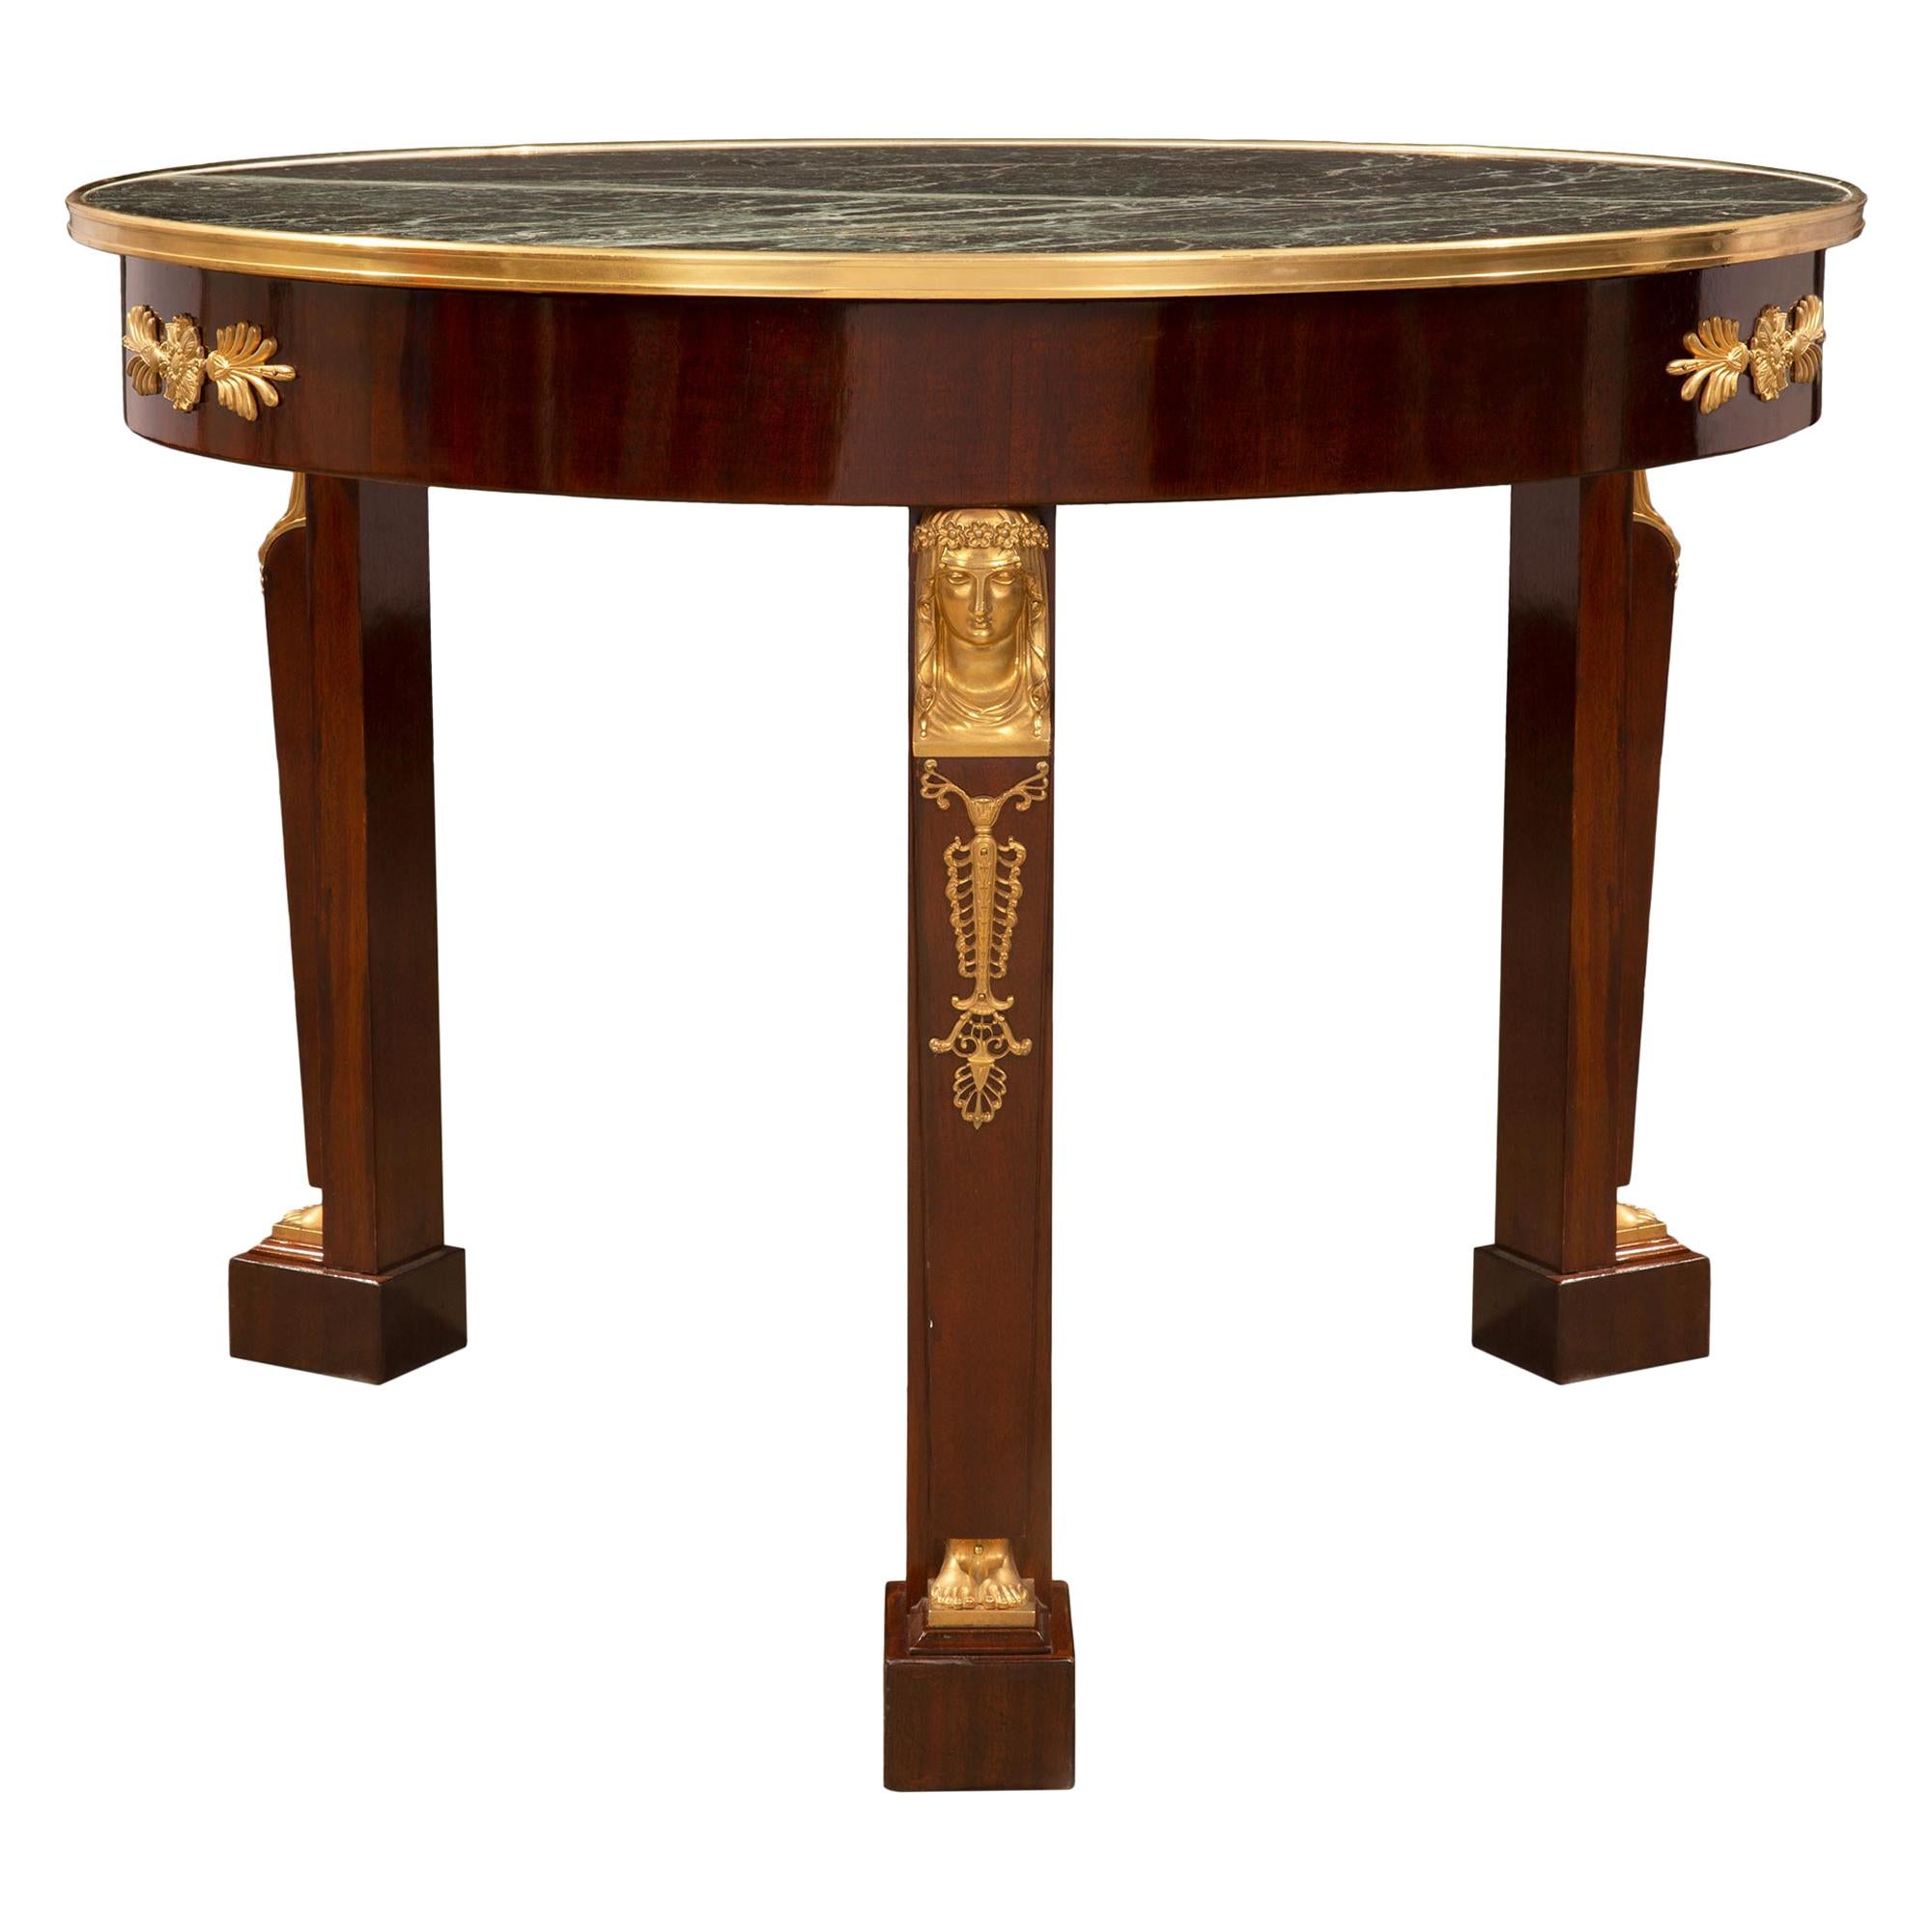 French Mid-19th Century Empire Style Mahogany and Marble Center Table For Sale